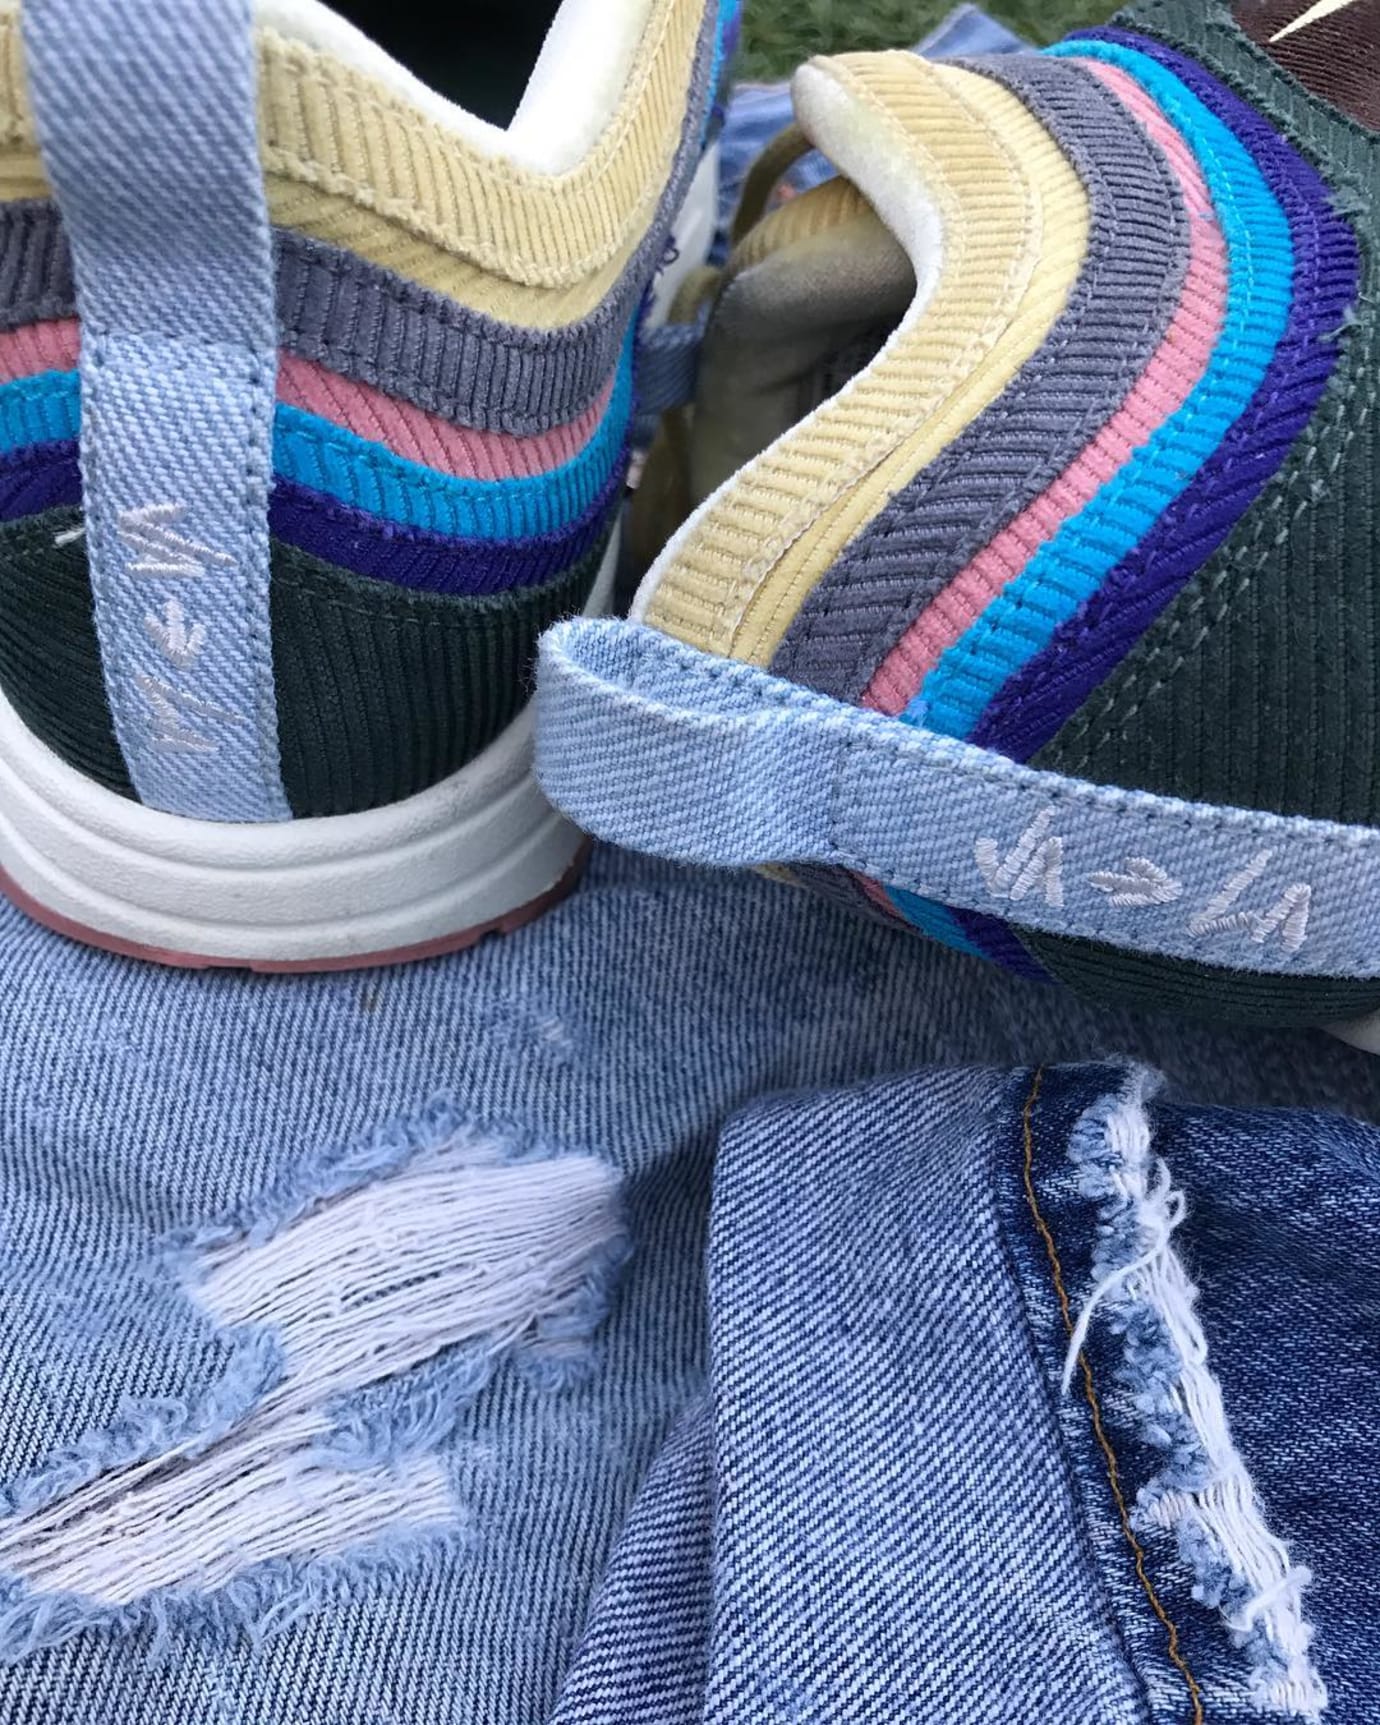 nike air max wotherspoon